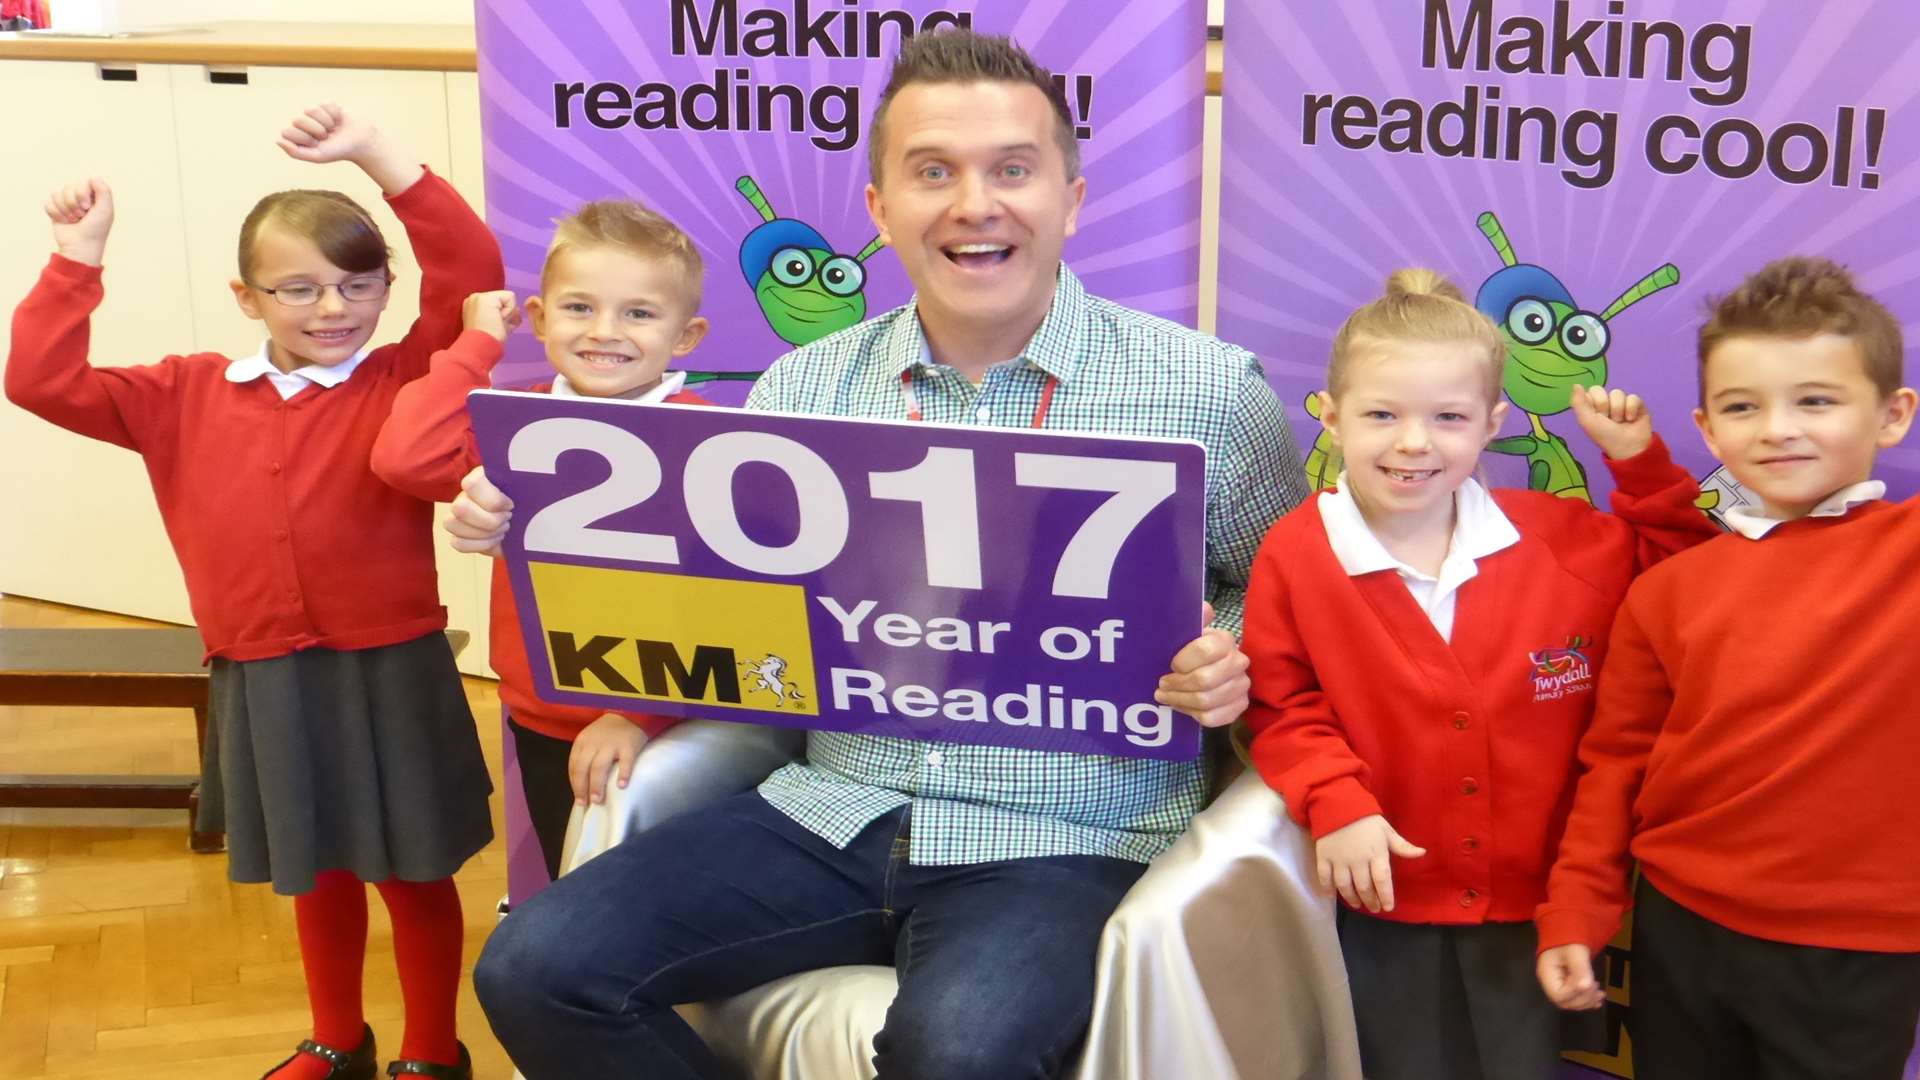 Phil Gallagher - Mister Maker - joins Cherry Class pupils Lucy Tindall, Noah Watkins, Maizie Collins and Kaya Olgunat at Twydall Primary to launch KM's Year of Reading campaign